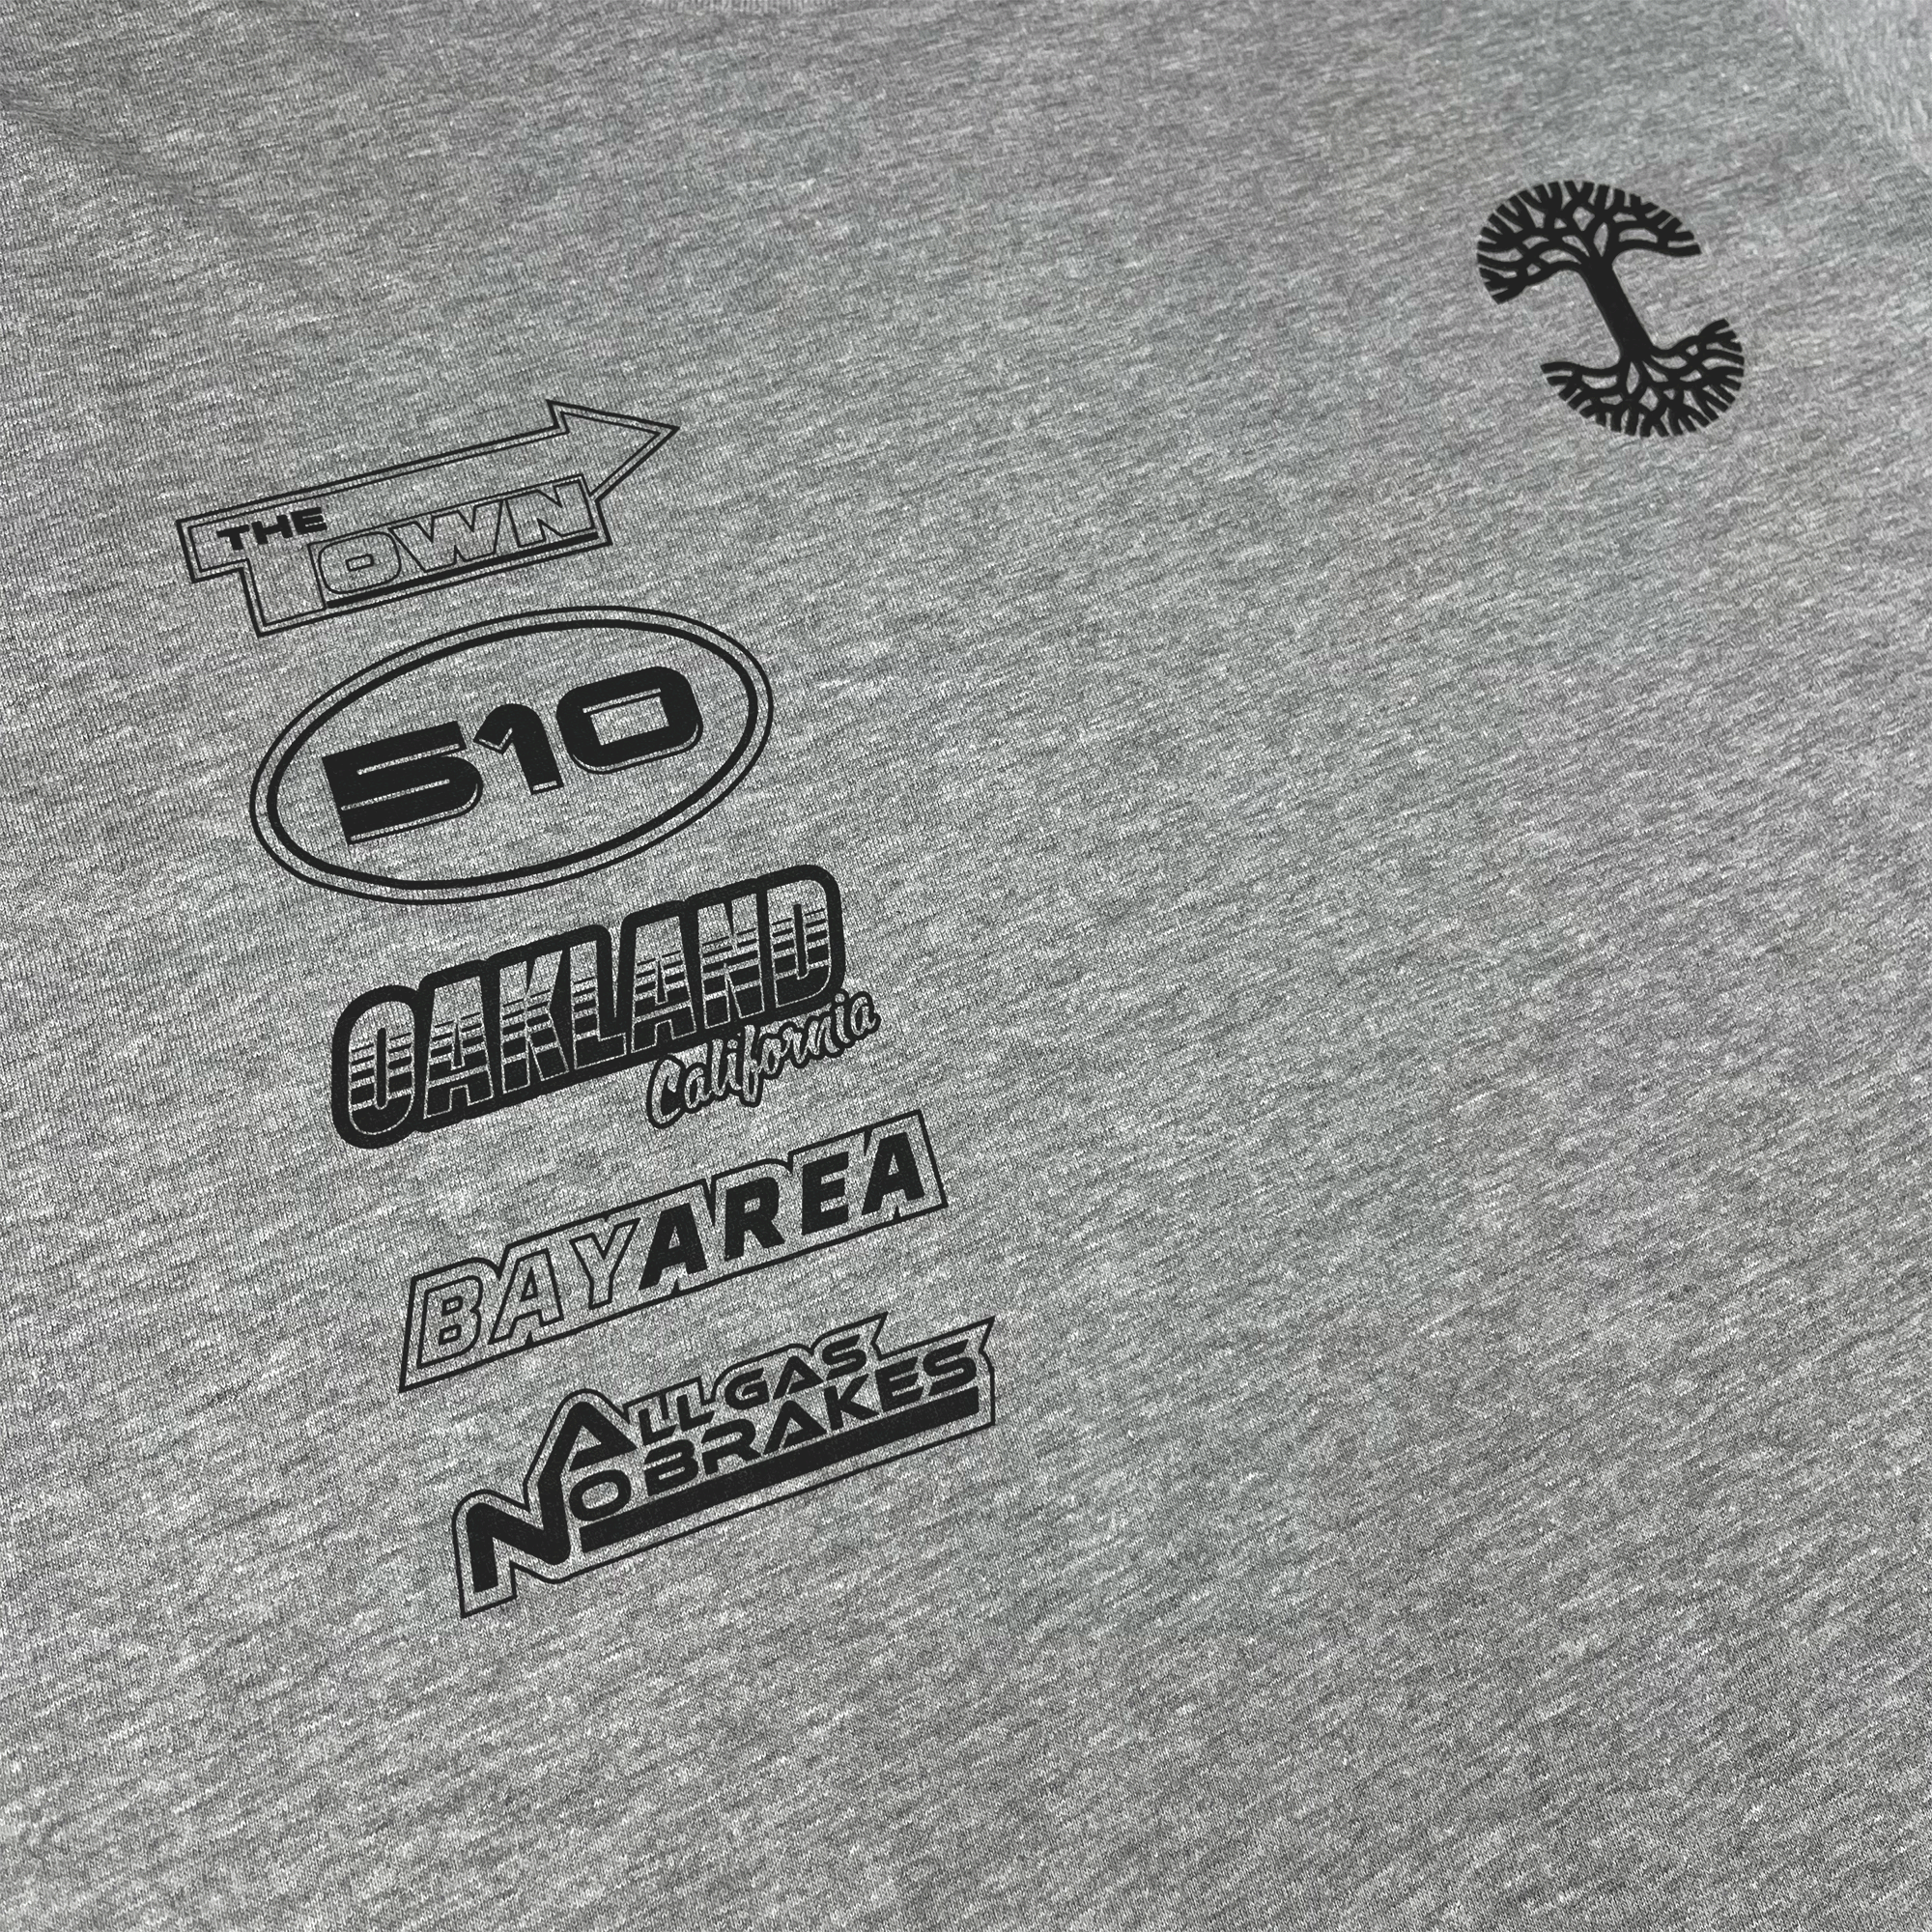 Angled close-up of black race car-inspired design and Oaklandish tree logo on grey long-sleeved t-shirt.